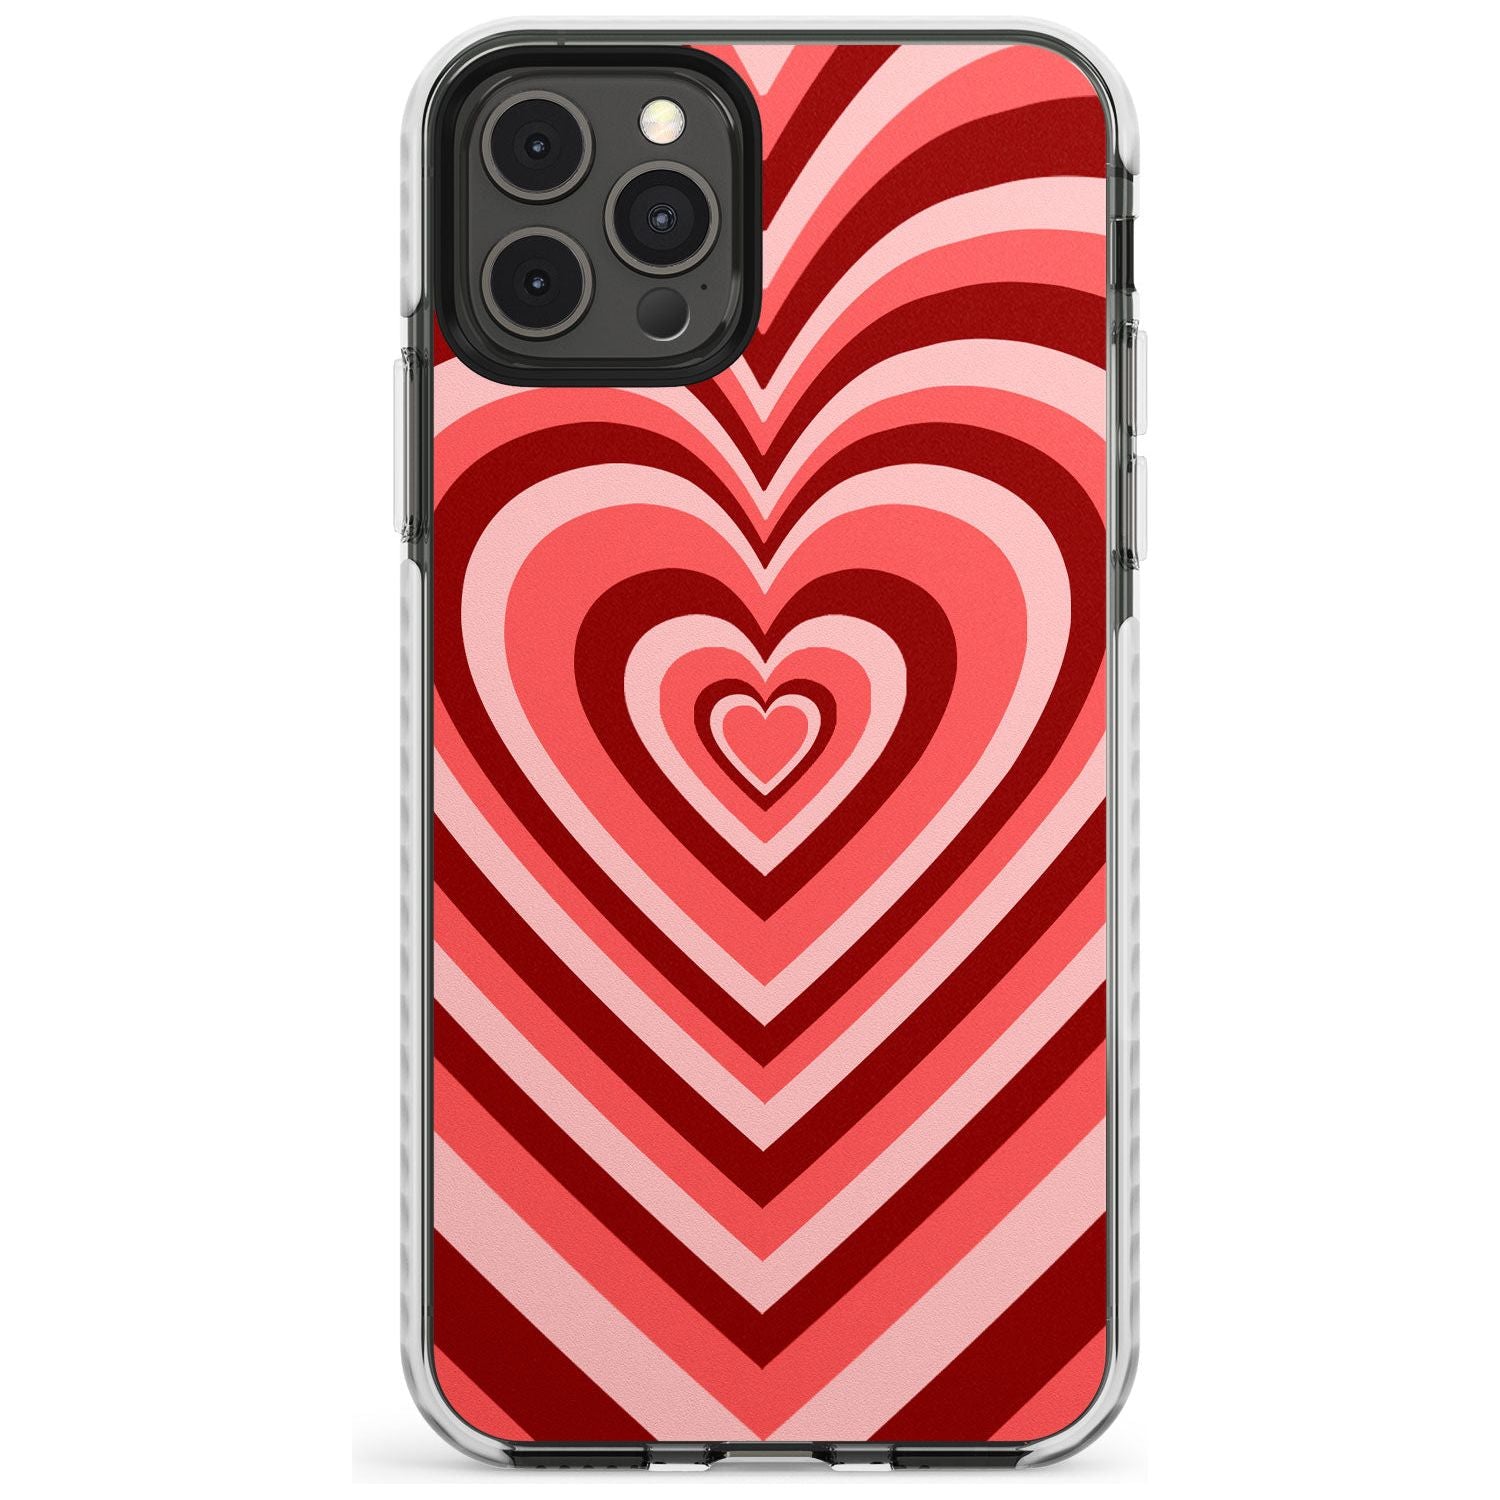 Red Heart Illusion Impact Phone Case for iPhone 11 Pro Max